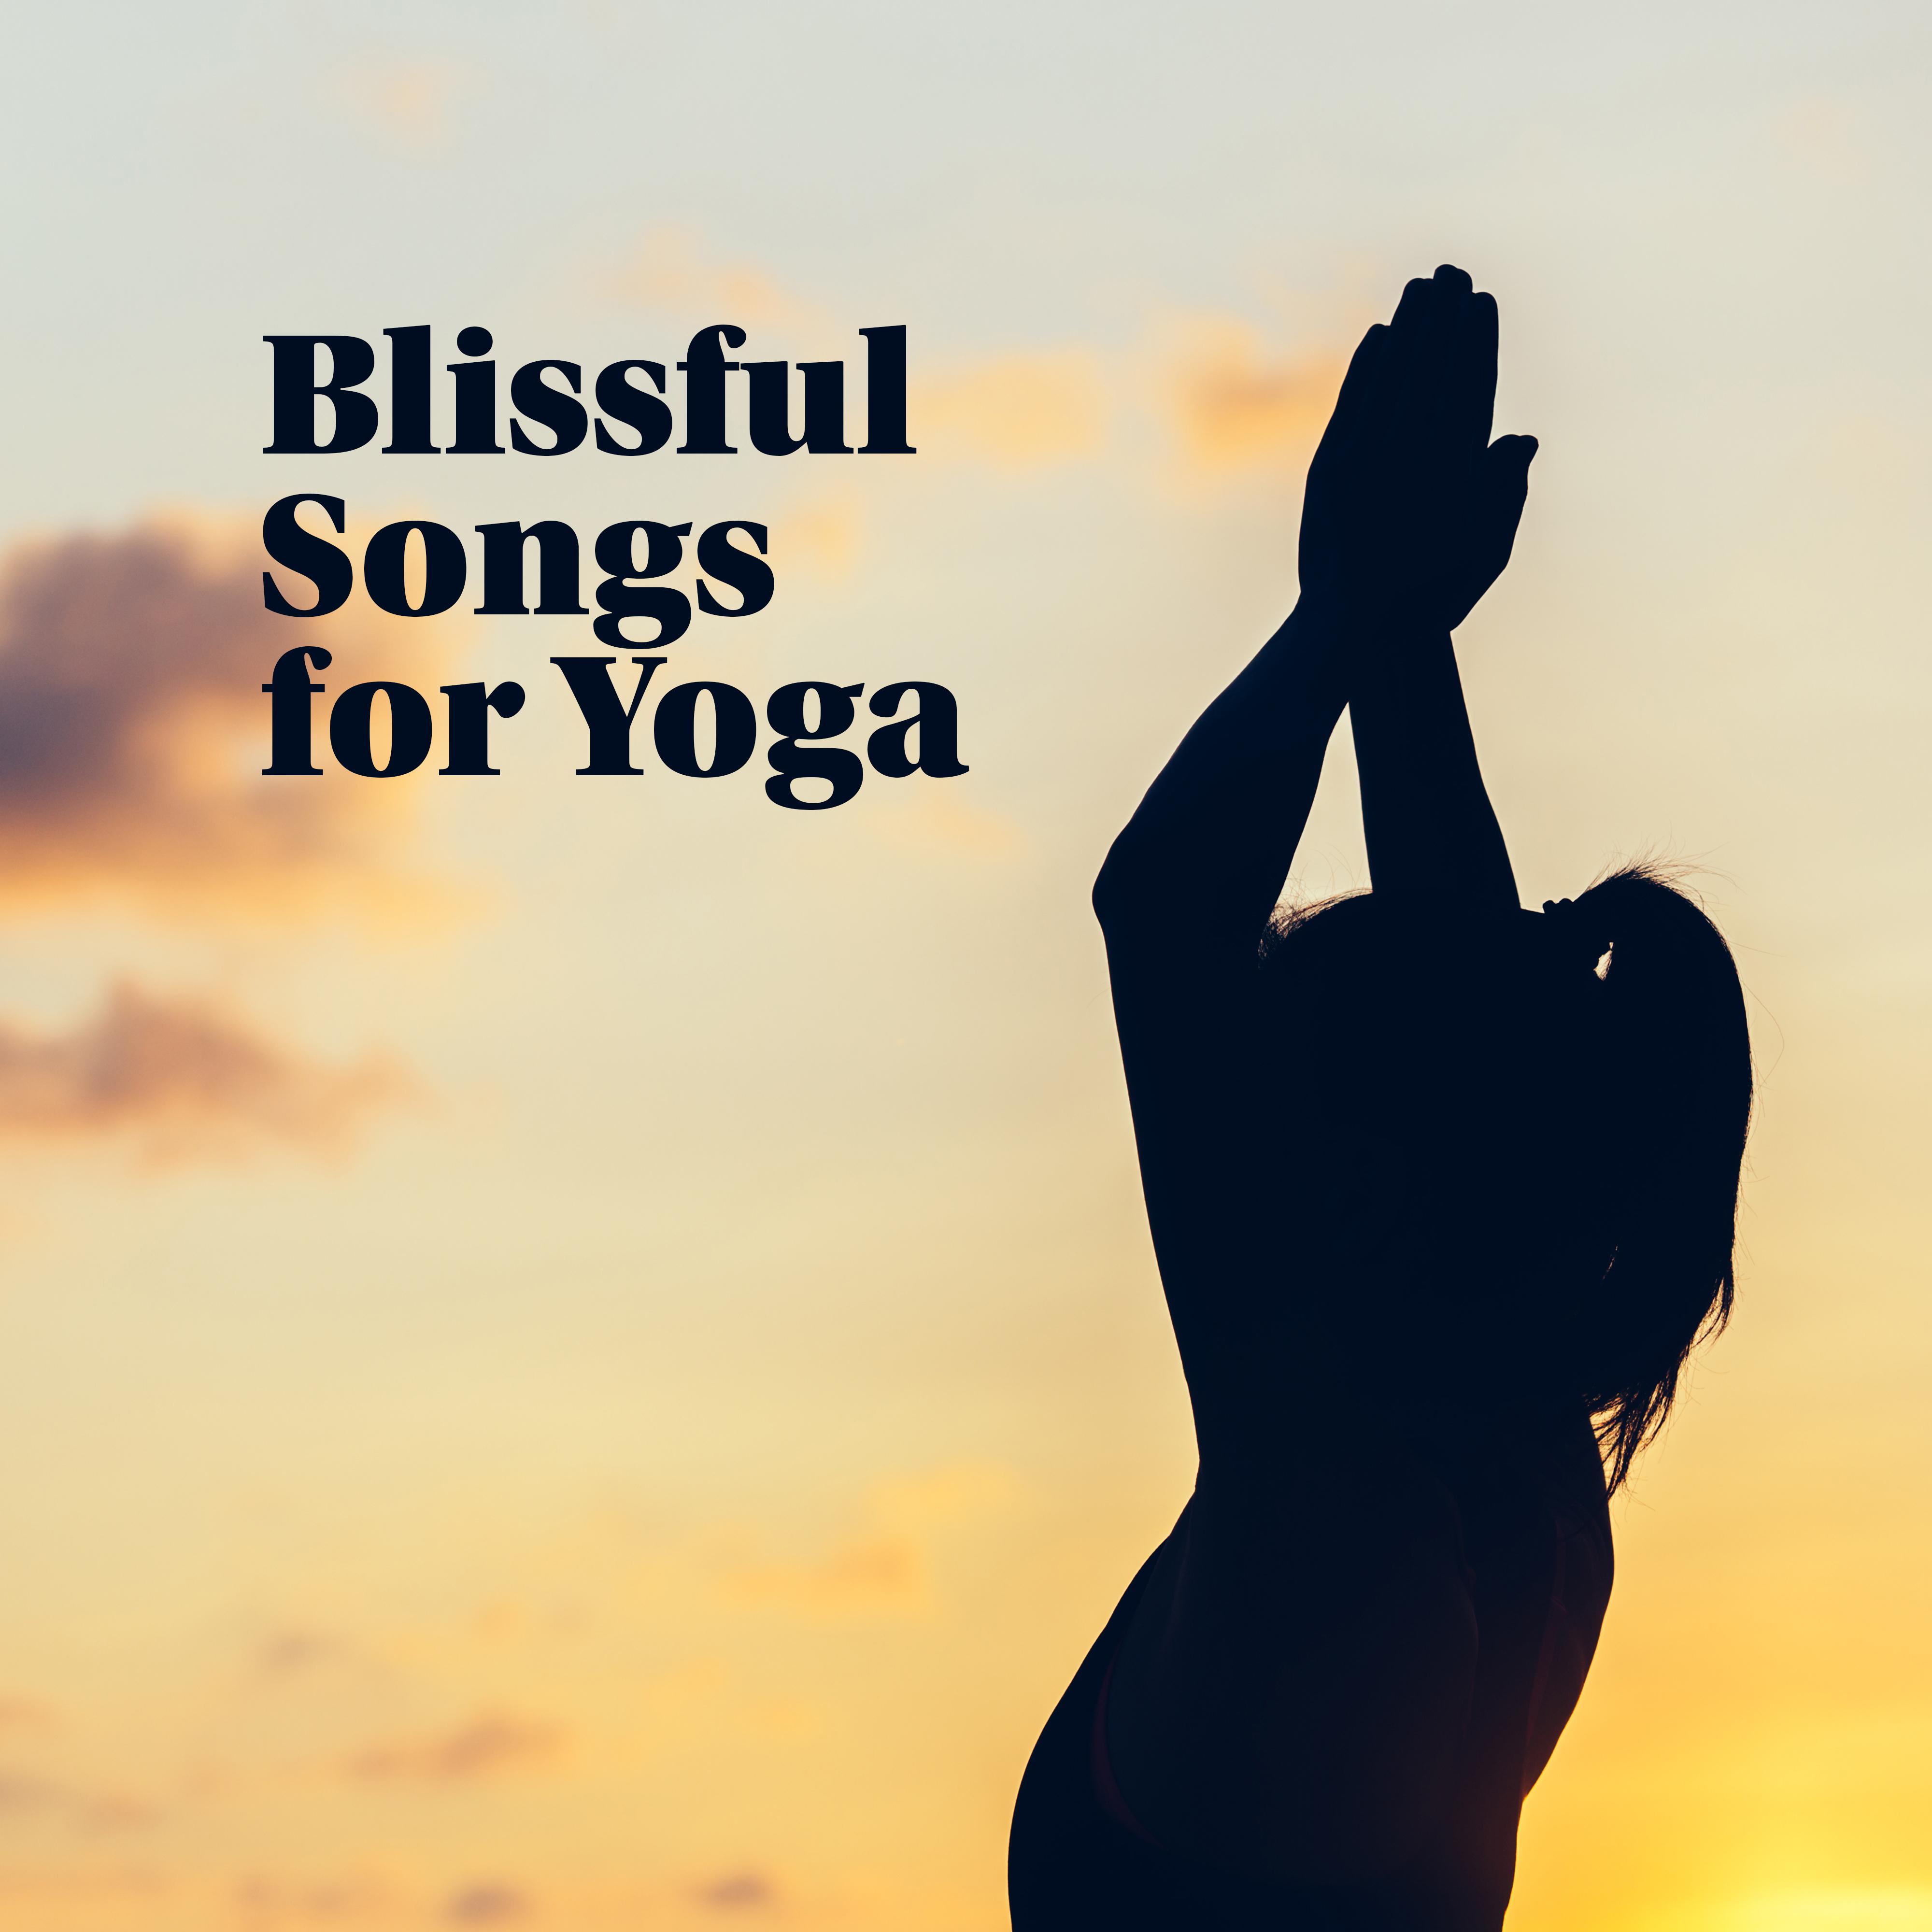 Blissful Songs for Yoga – Meditation Music Zone, Calming Healing Melodies for Deep Meditation, New Age Music, Spiritual Harmony, Zen, Reiki, Full Concentration